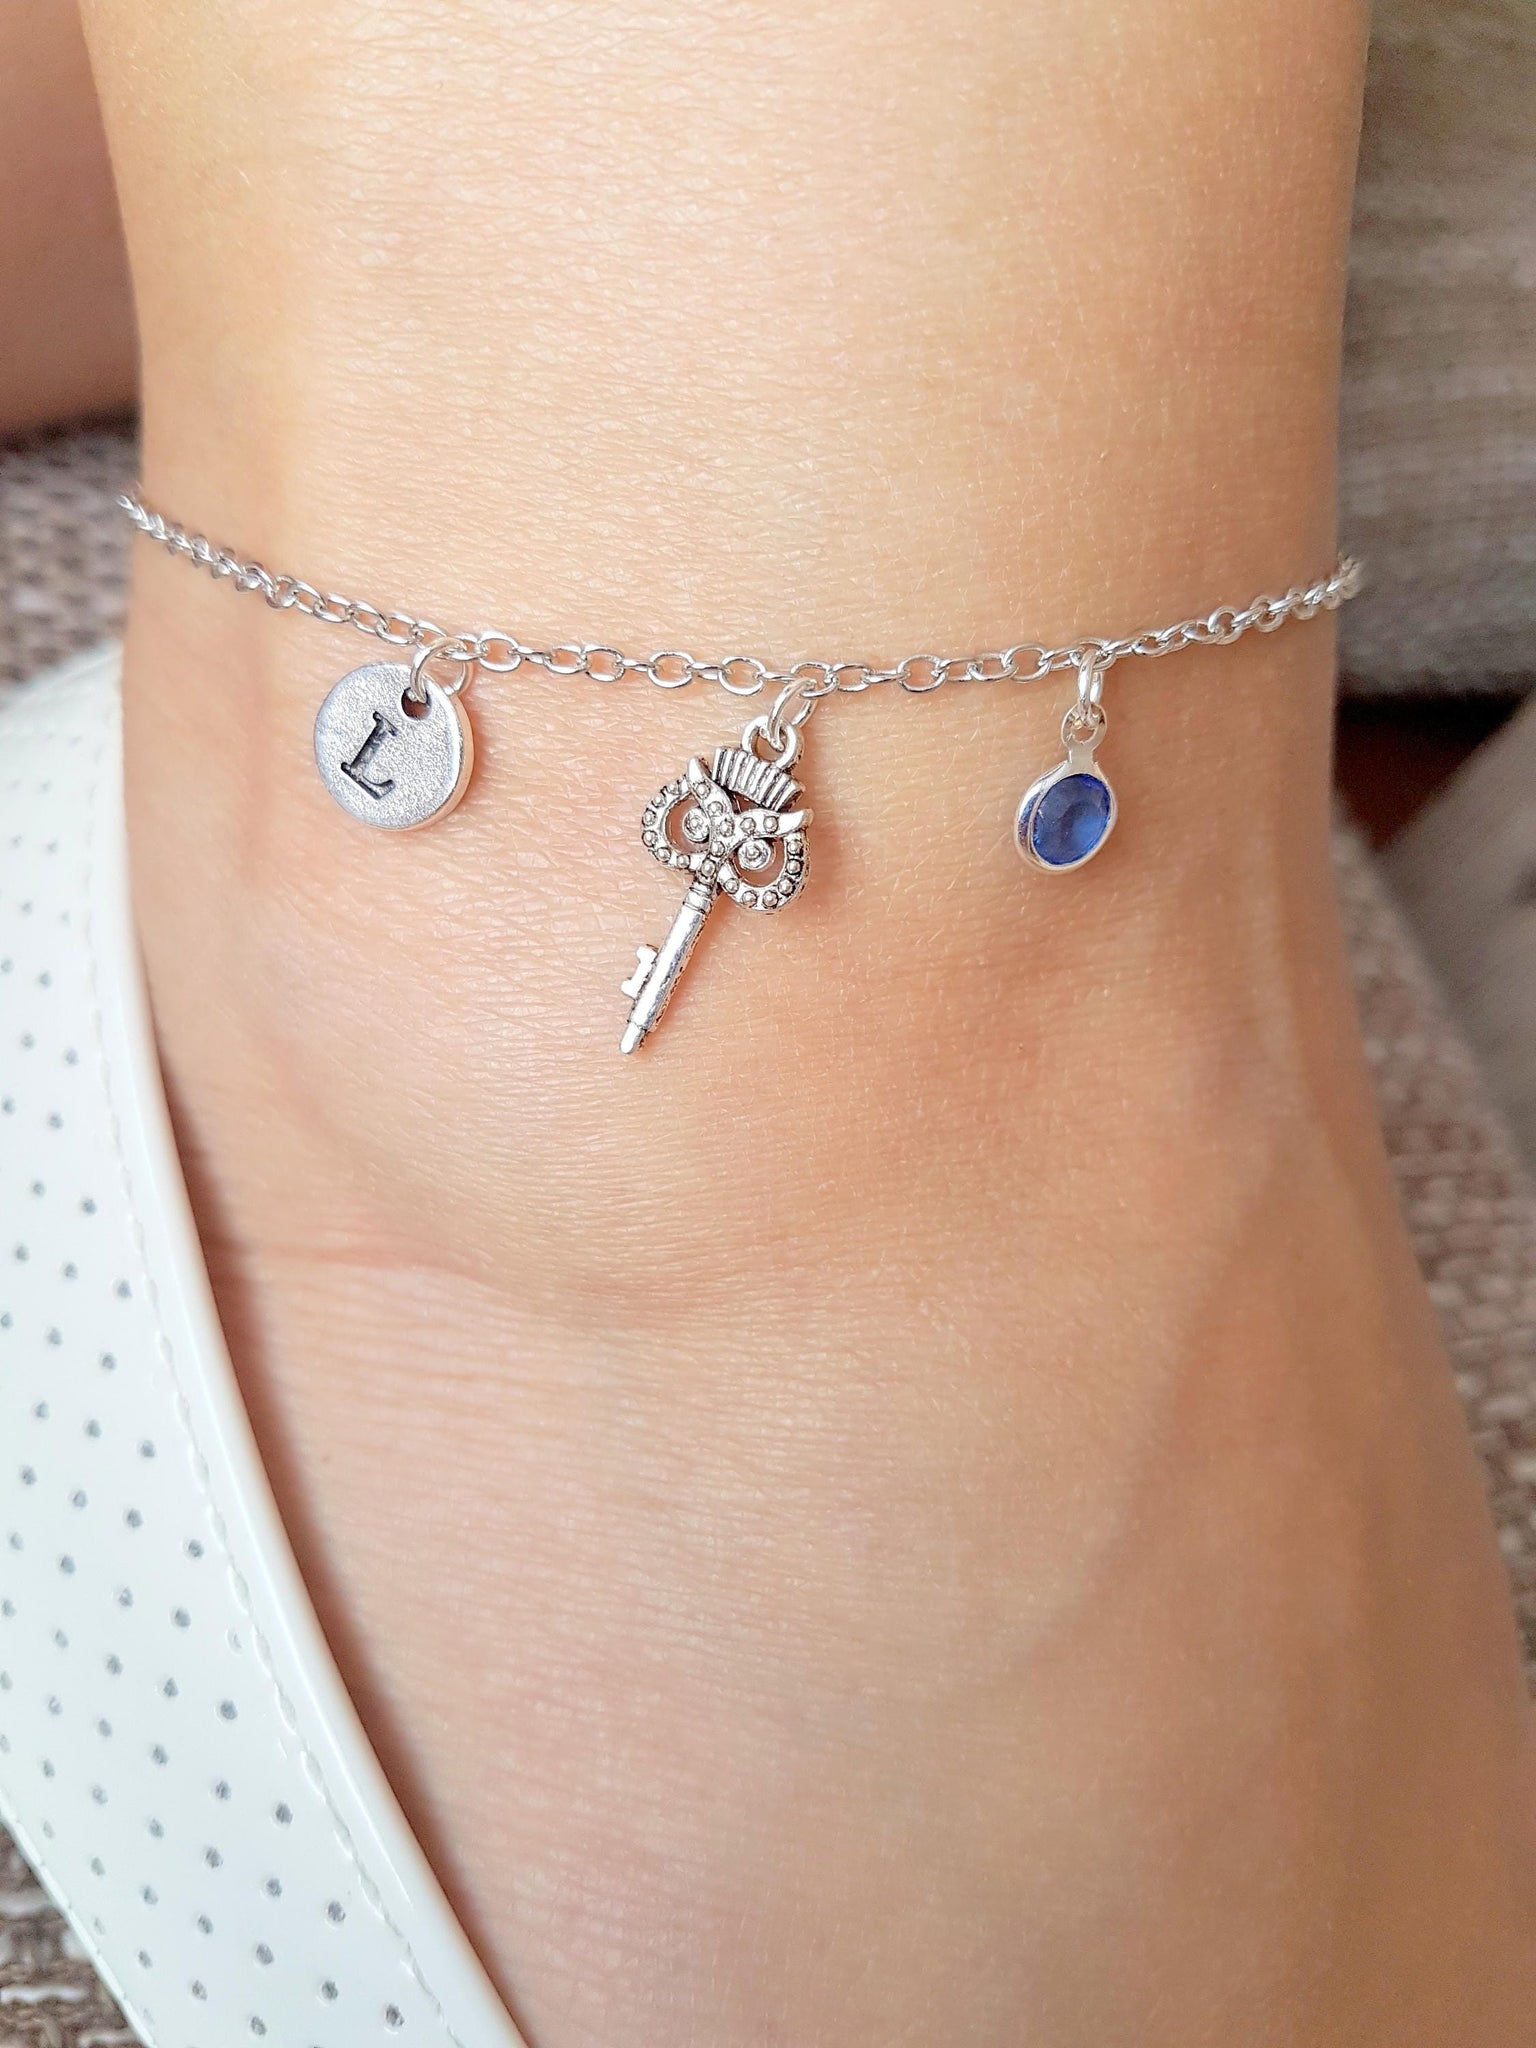 Silver Charm Anklets, Owl Key Foot Bracelet, Anklet Chain, Jewerly for Women, anklet with gem stone, personalized chain anklet,birthday gift